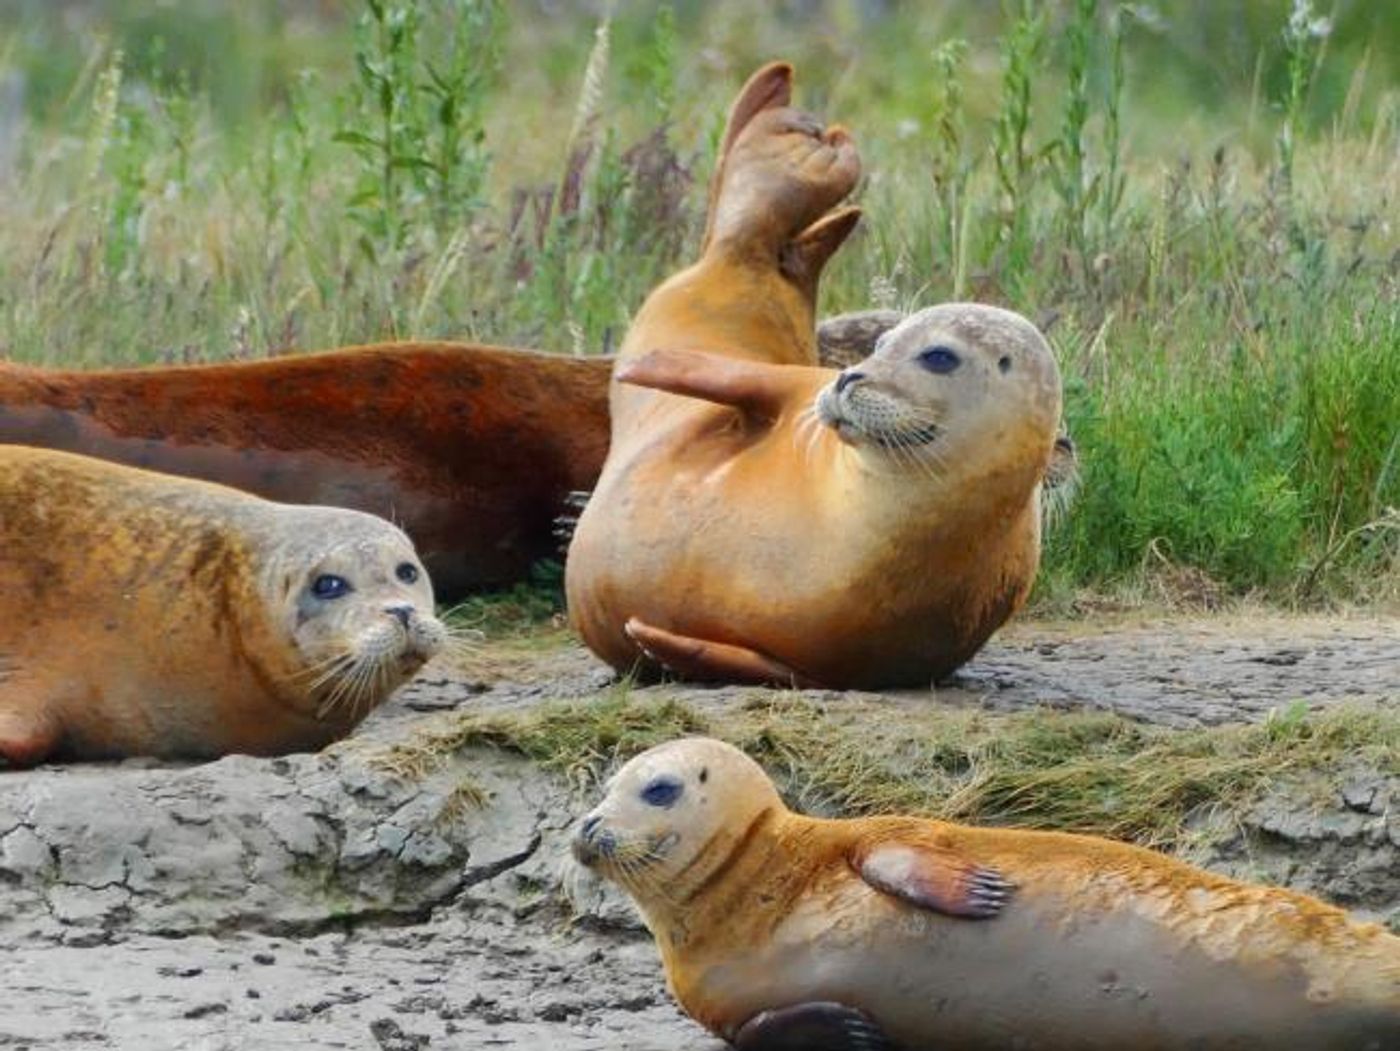 Seals in Essex have turned orange, and experts elaborate on why.